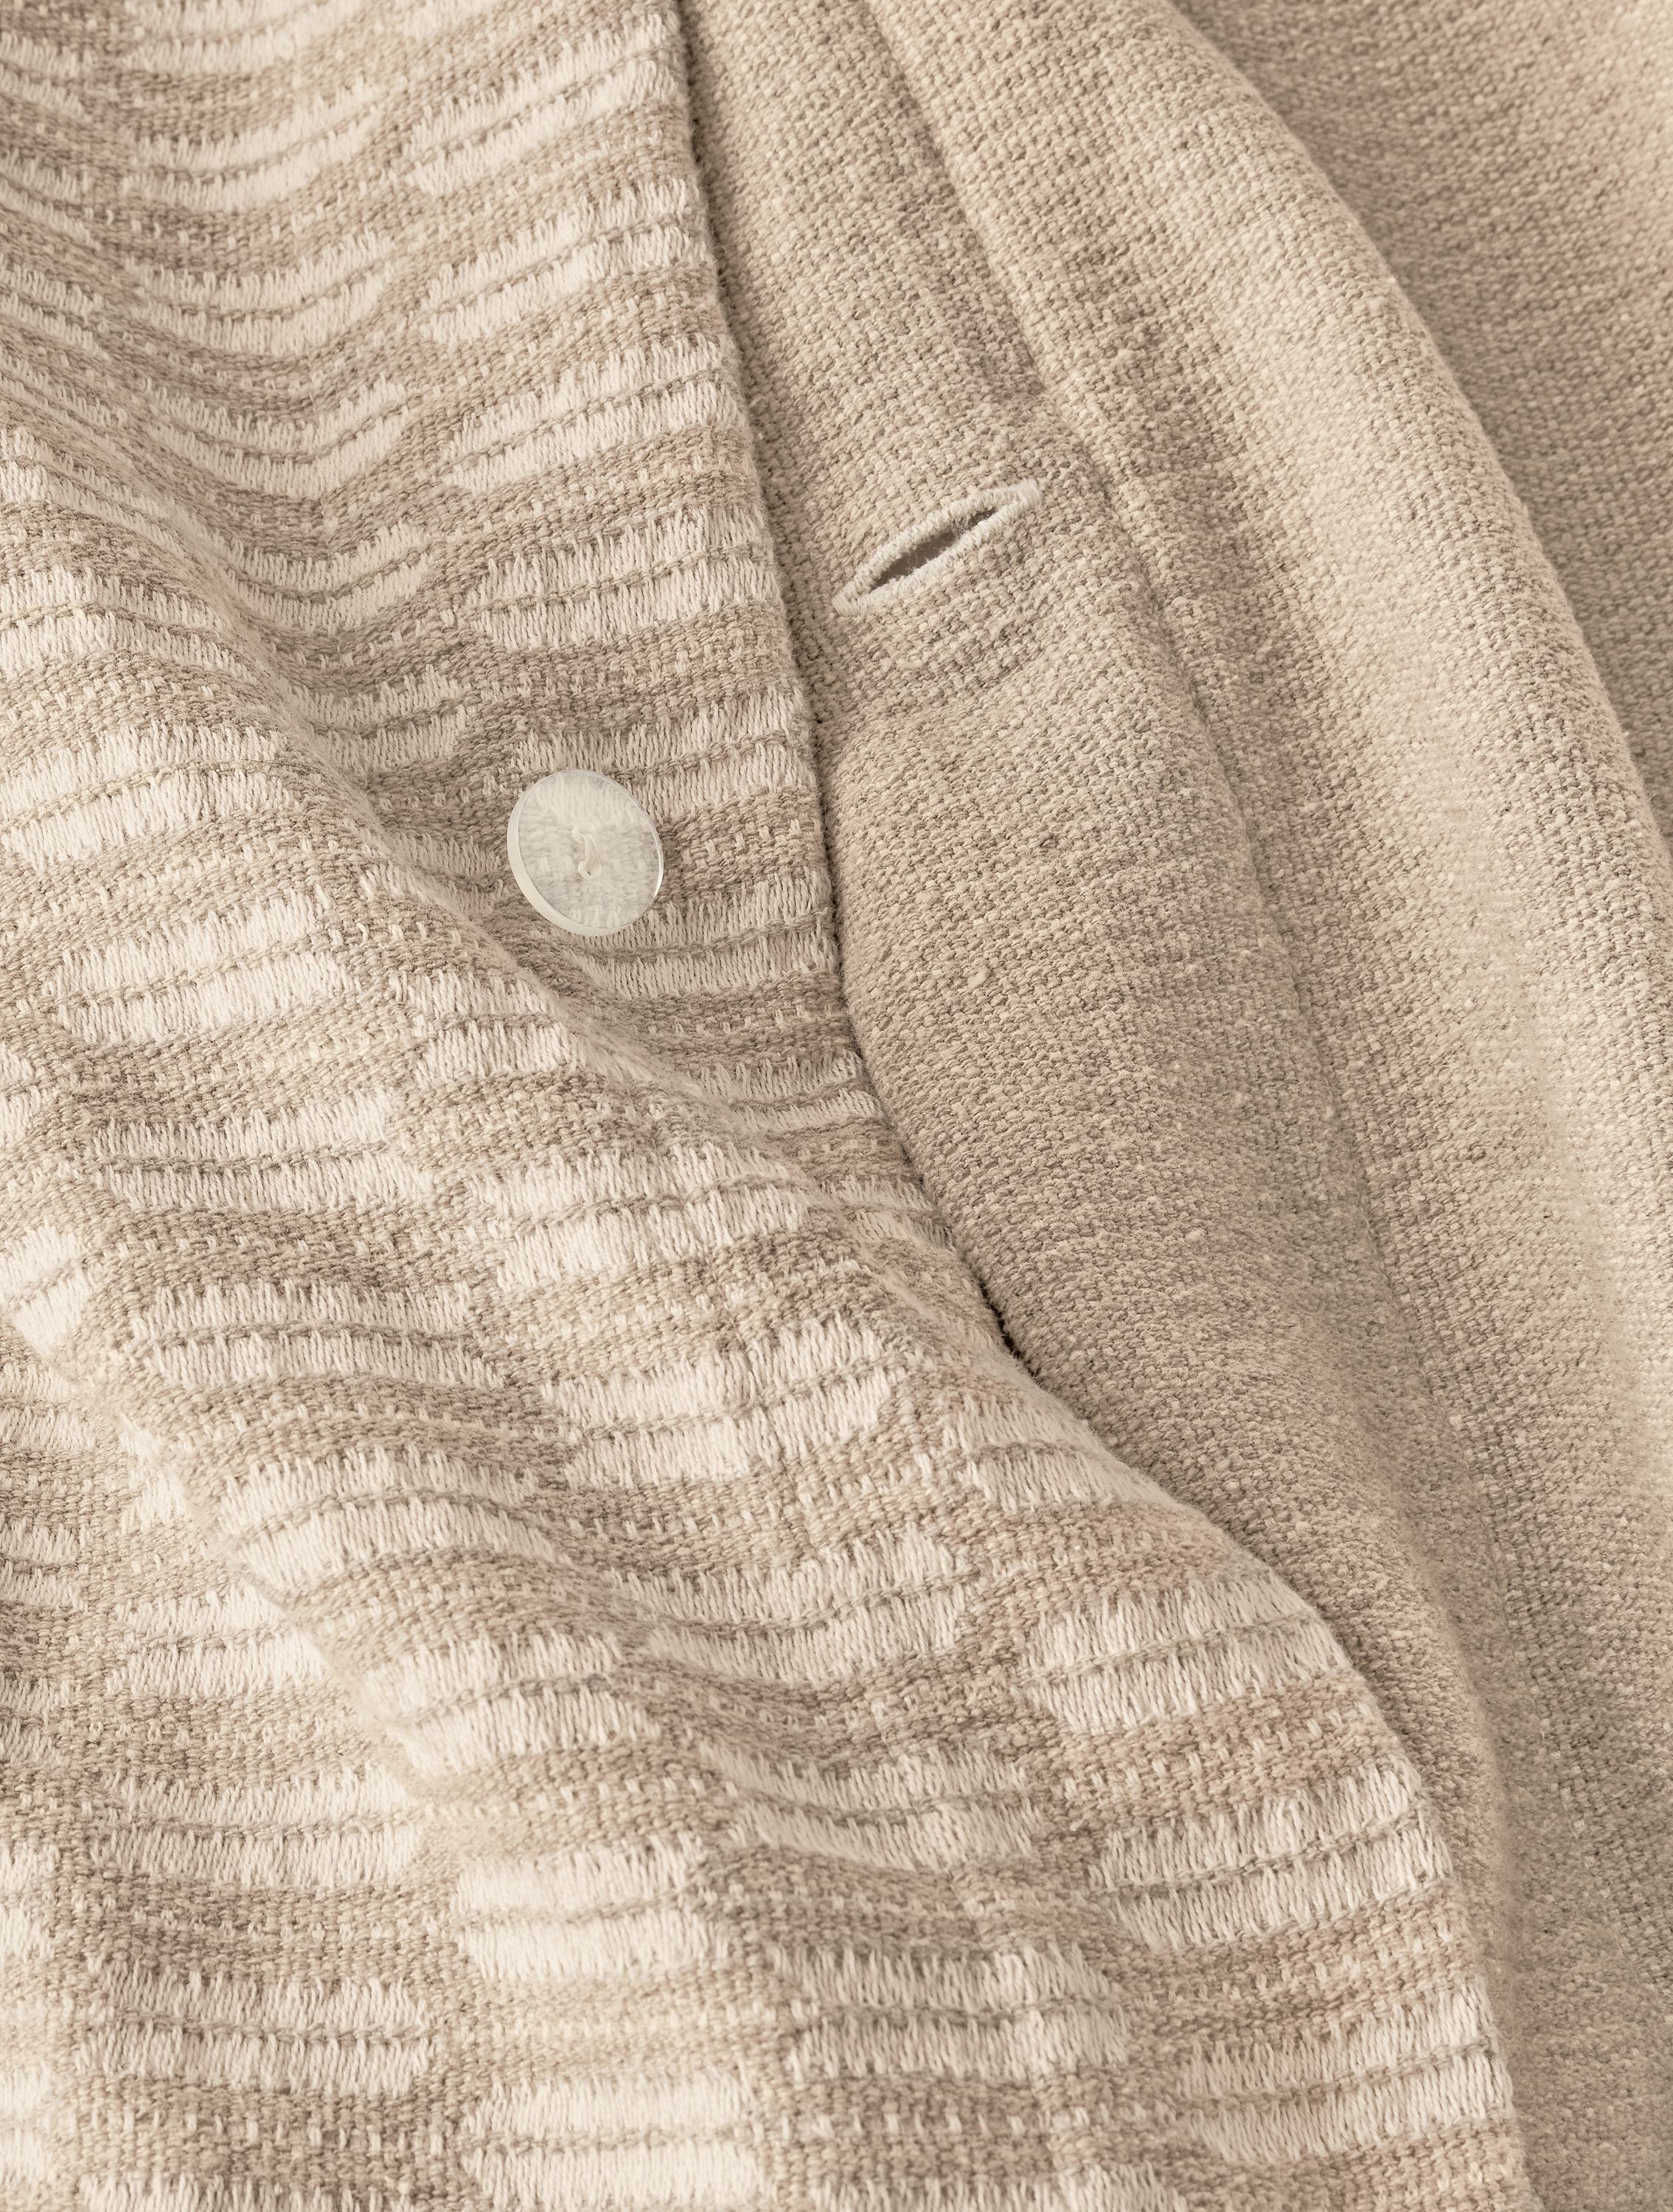 Close button detail of queen Sheffield duvet cover in ivory.